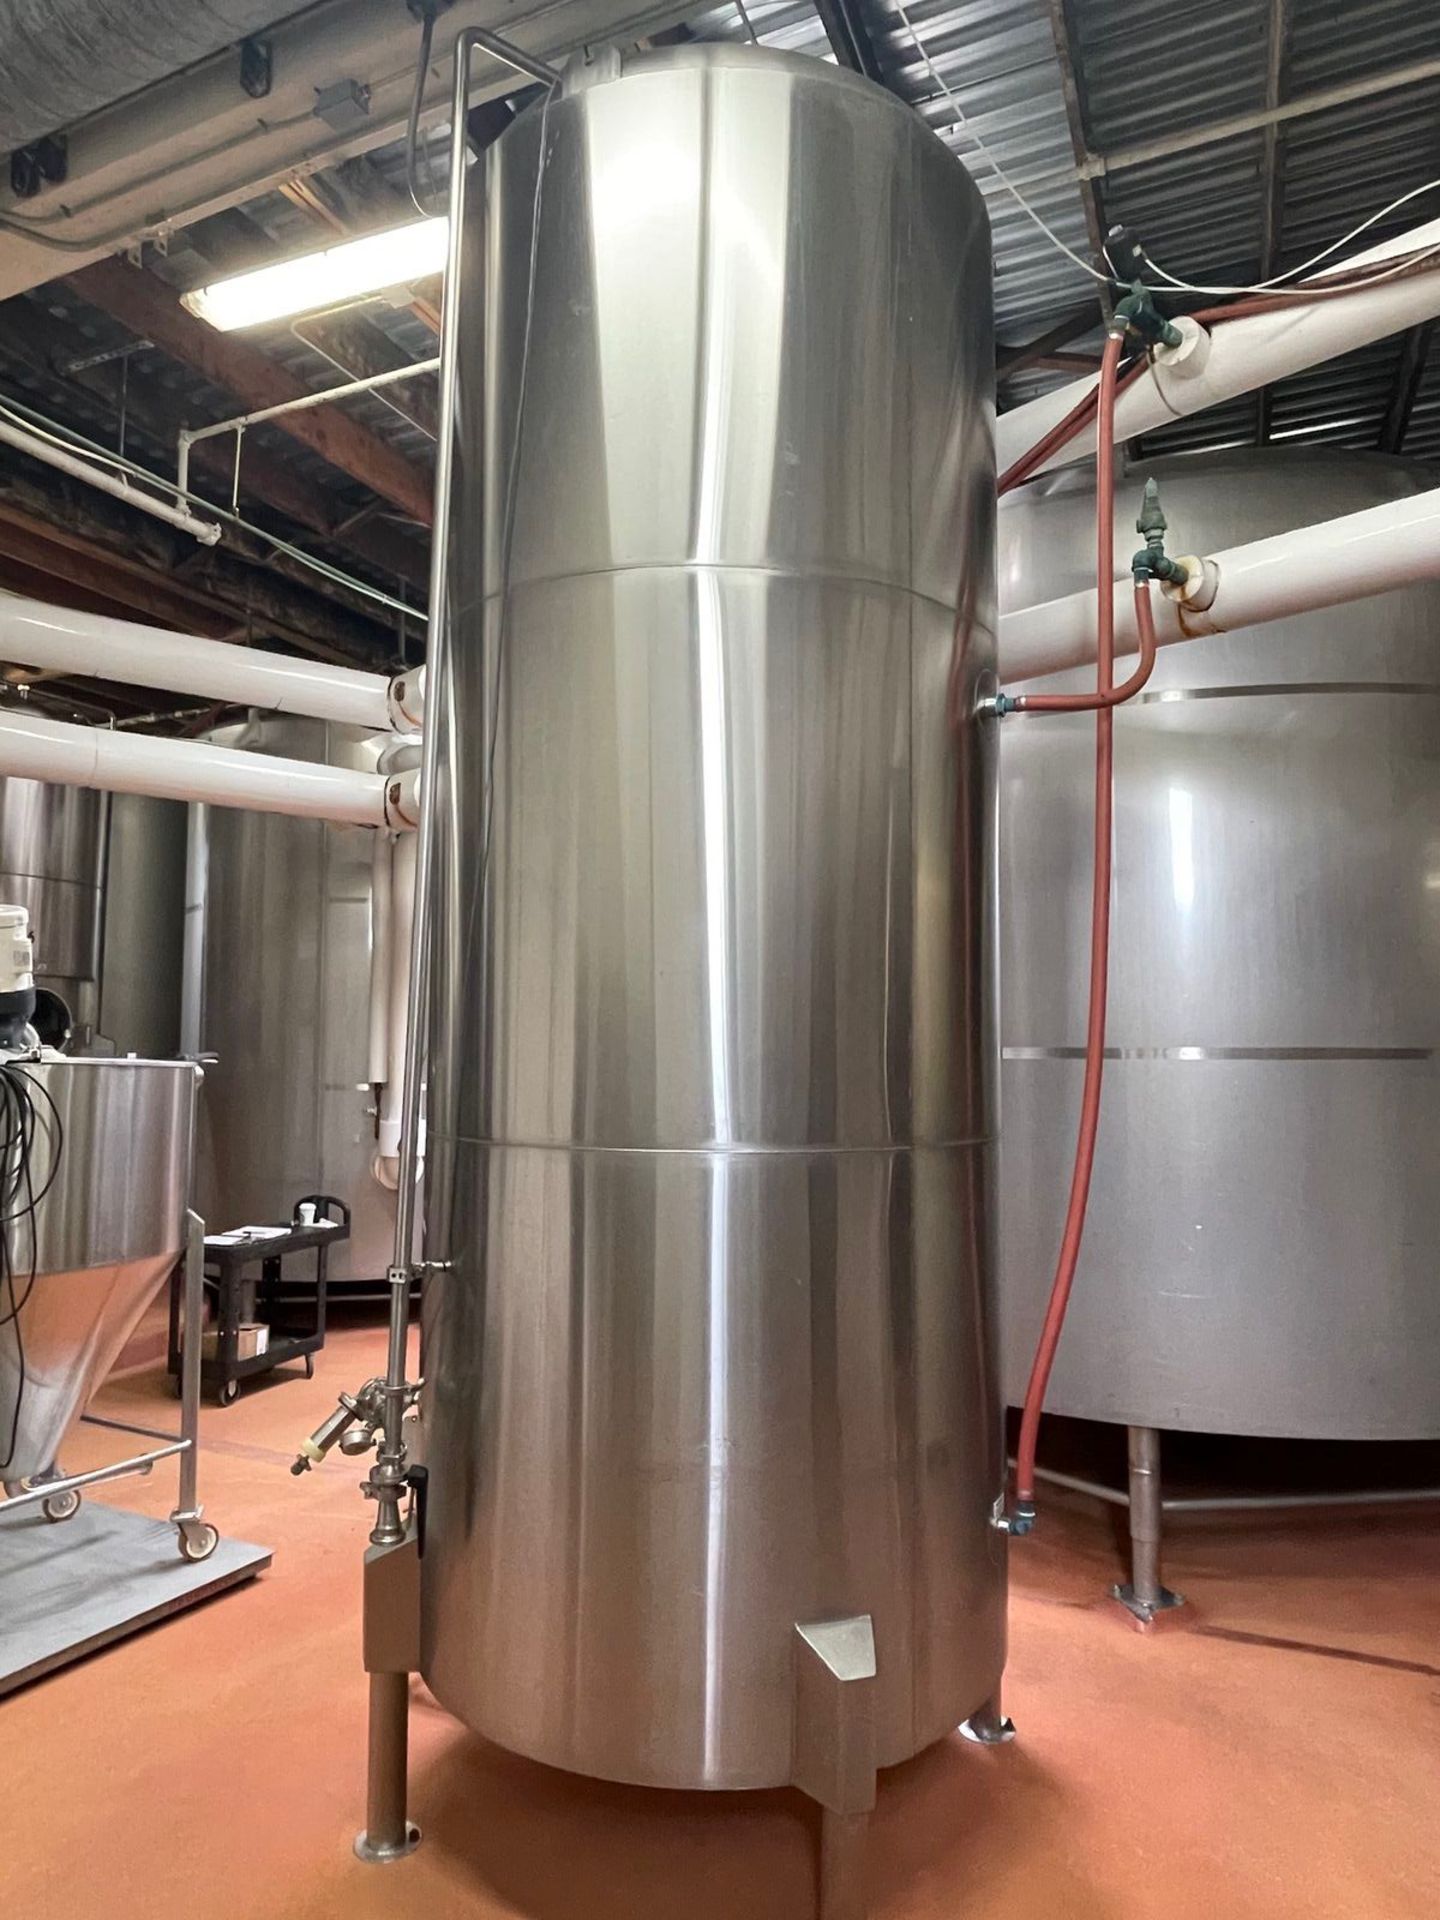 JVNW 40 BBL YEAST TANK (1250 GALLON TANK), JACKETED, APPROX DIMS: 14'2" OAH X 64 | Rig Fee: 650 - Image 2 of 5